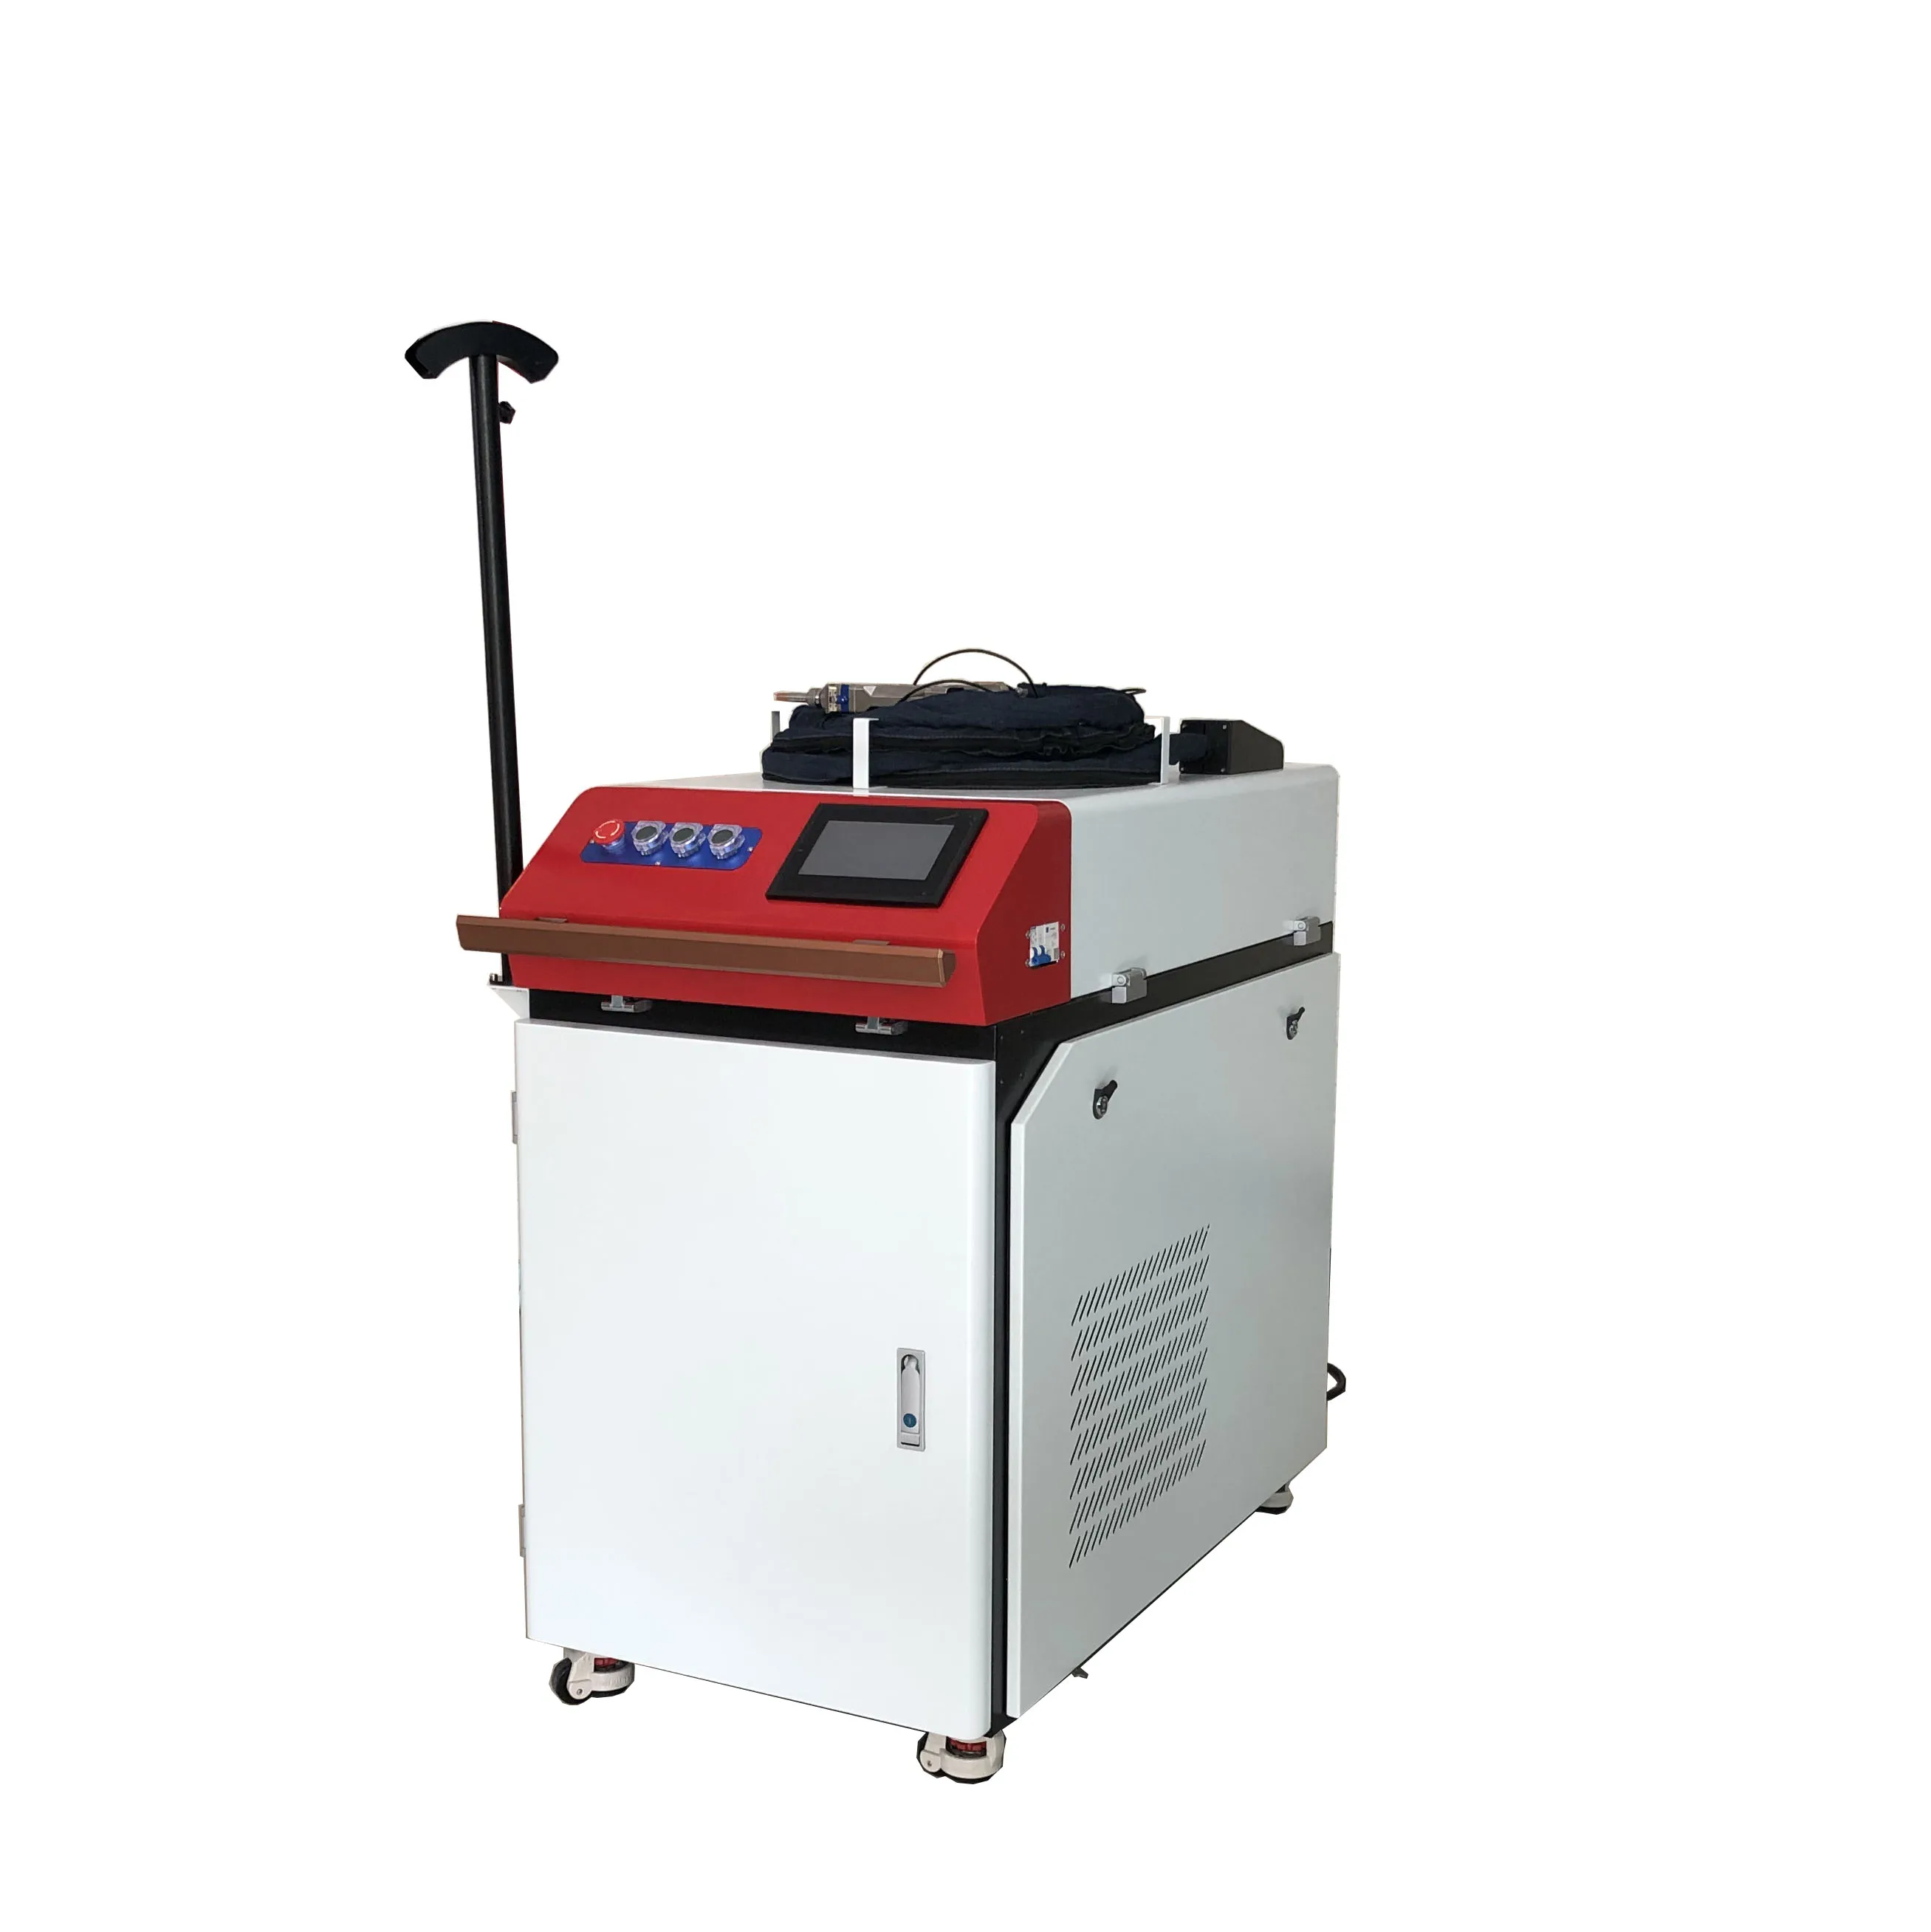 
With Wobble head handheld high quality automatic fiber laser welding machine for stainless steel iron aluminum copper brass 